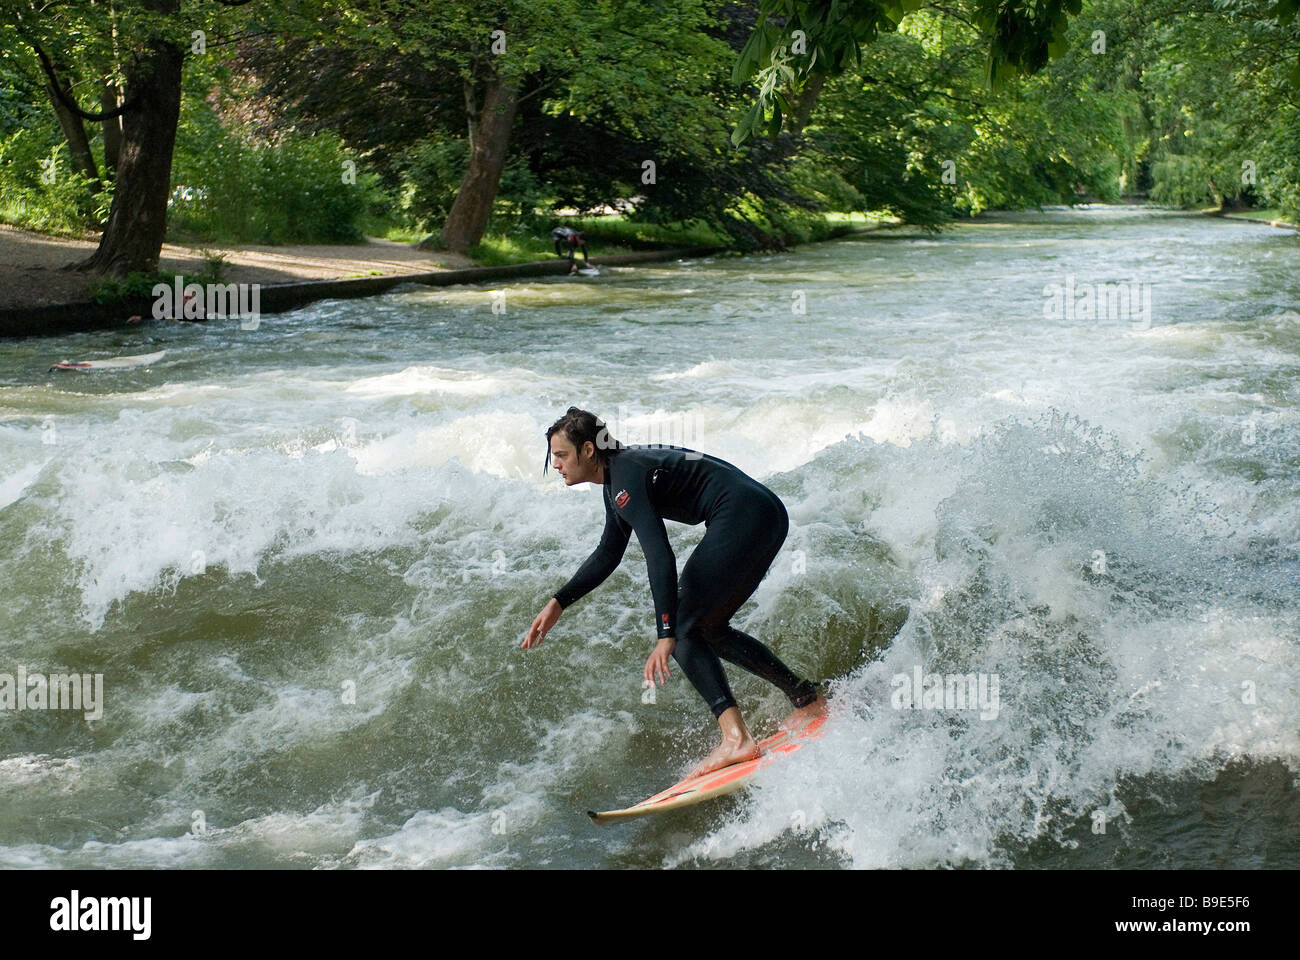 Surfer practising on the Eisbach river, Munich, Germany Stock Photo